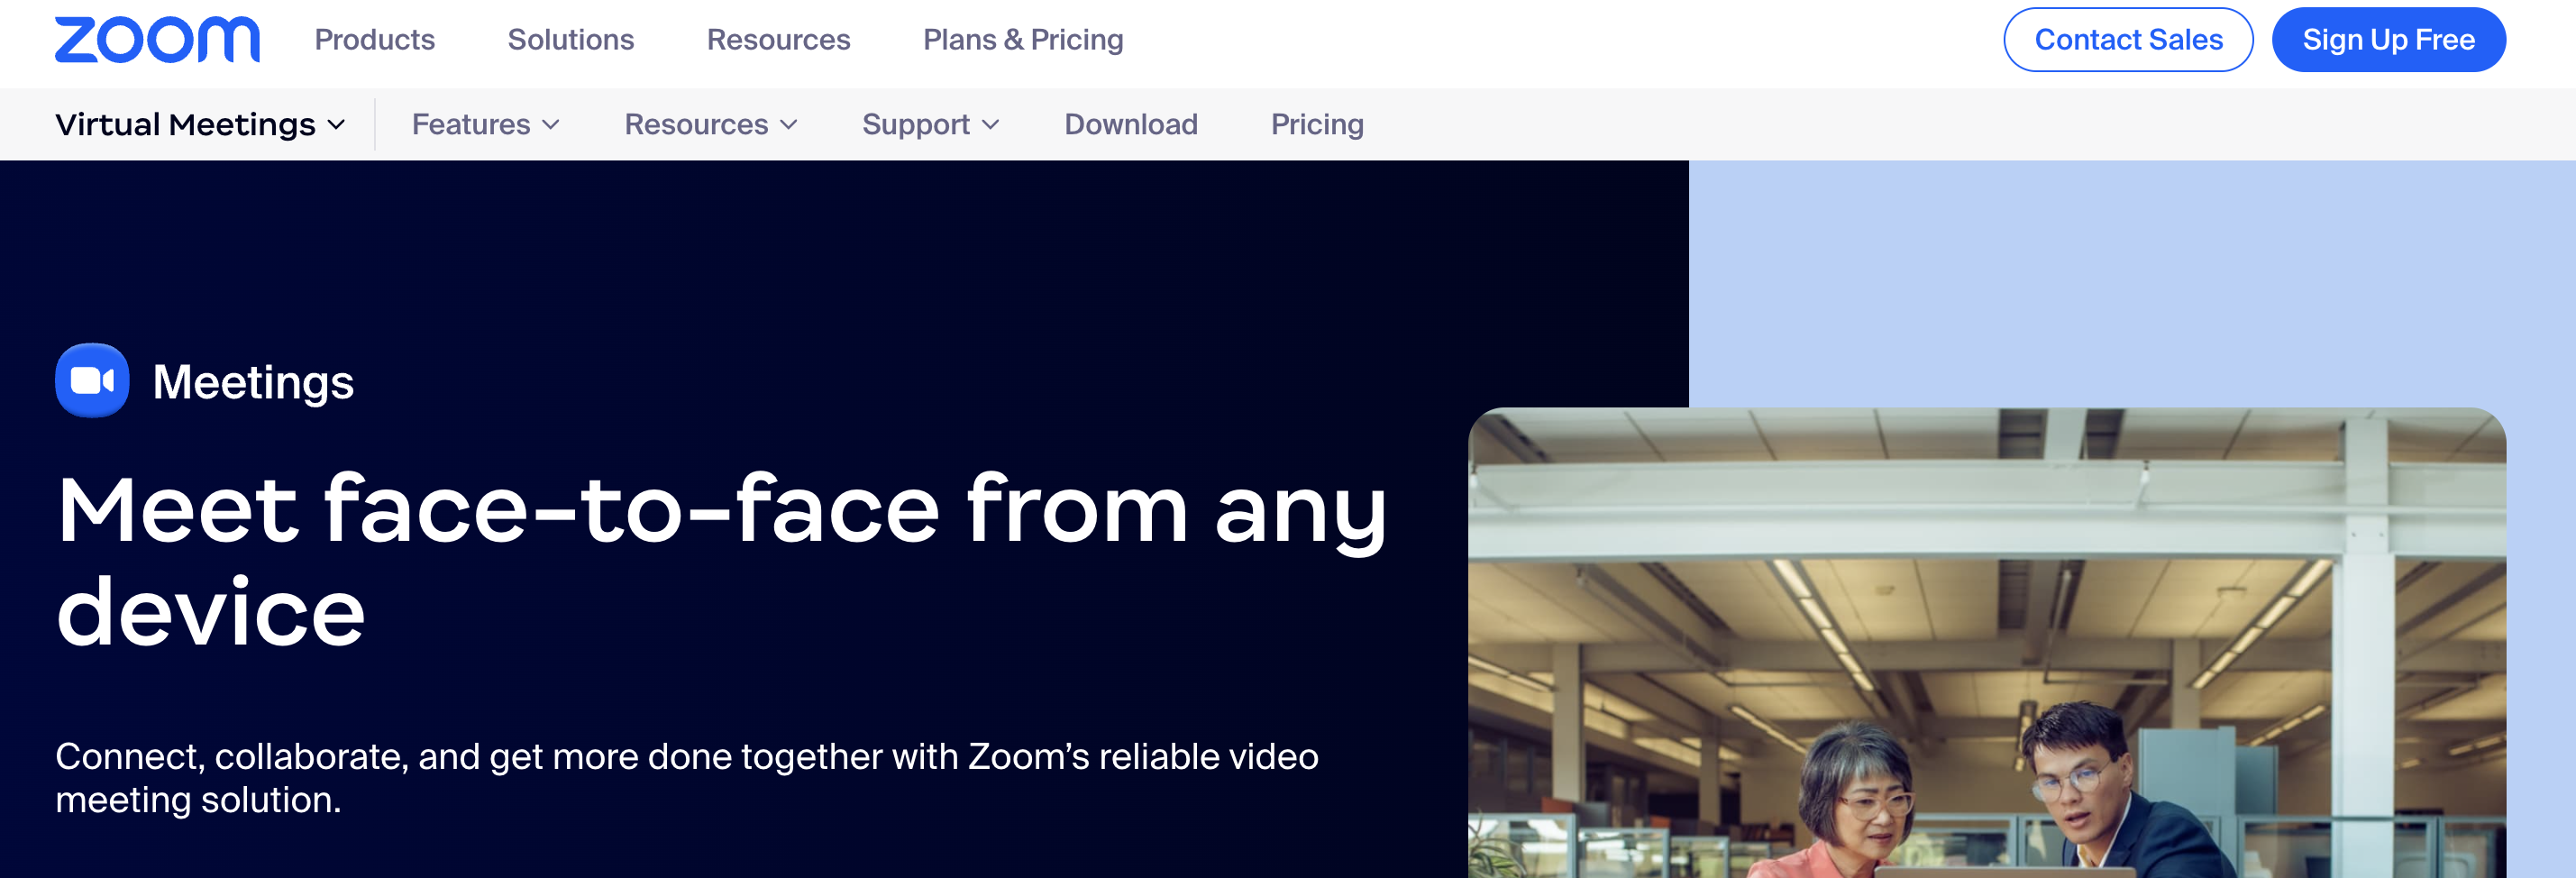 Zoom virtual meeting product page